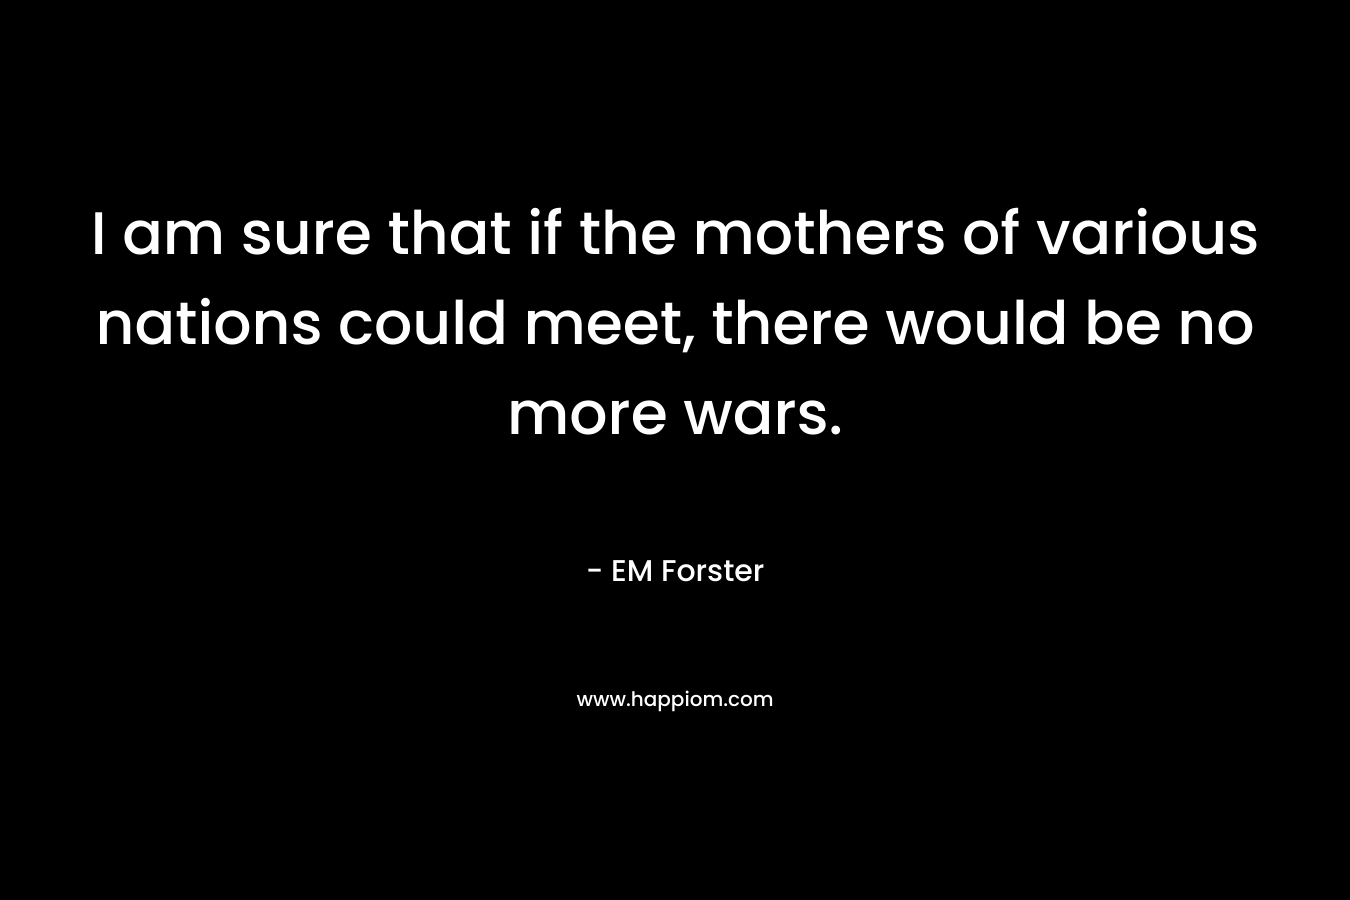 I am sure that if the mothers of various nations could meet, there would be no more wars. – EM Forster